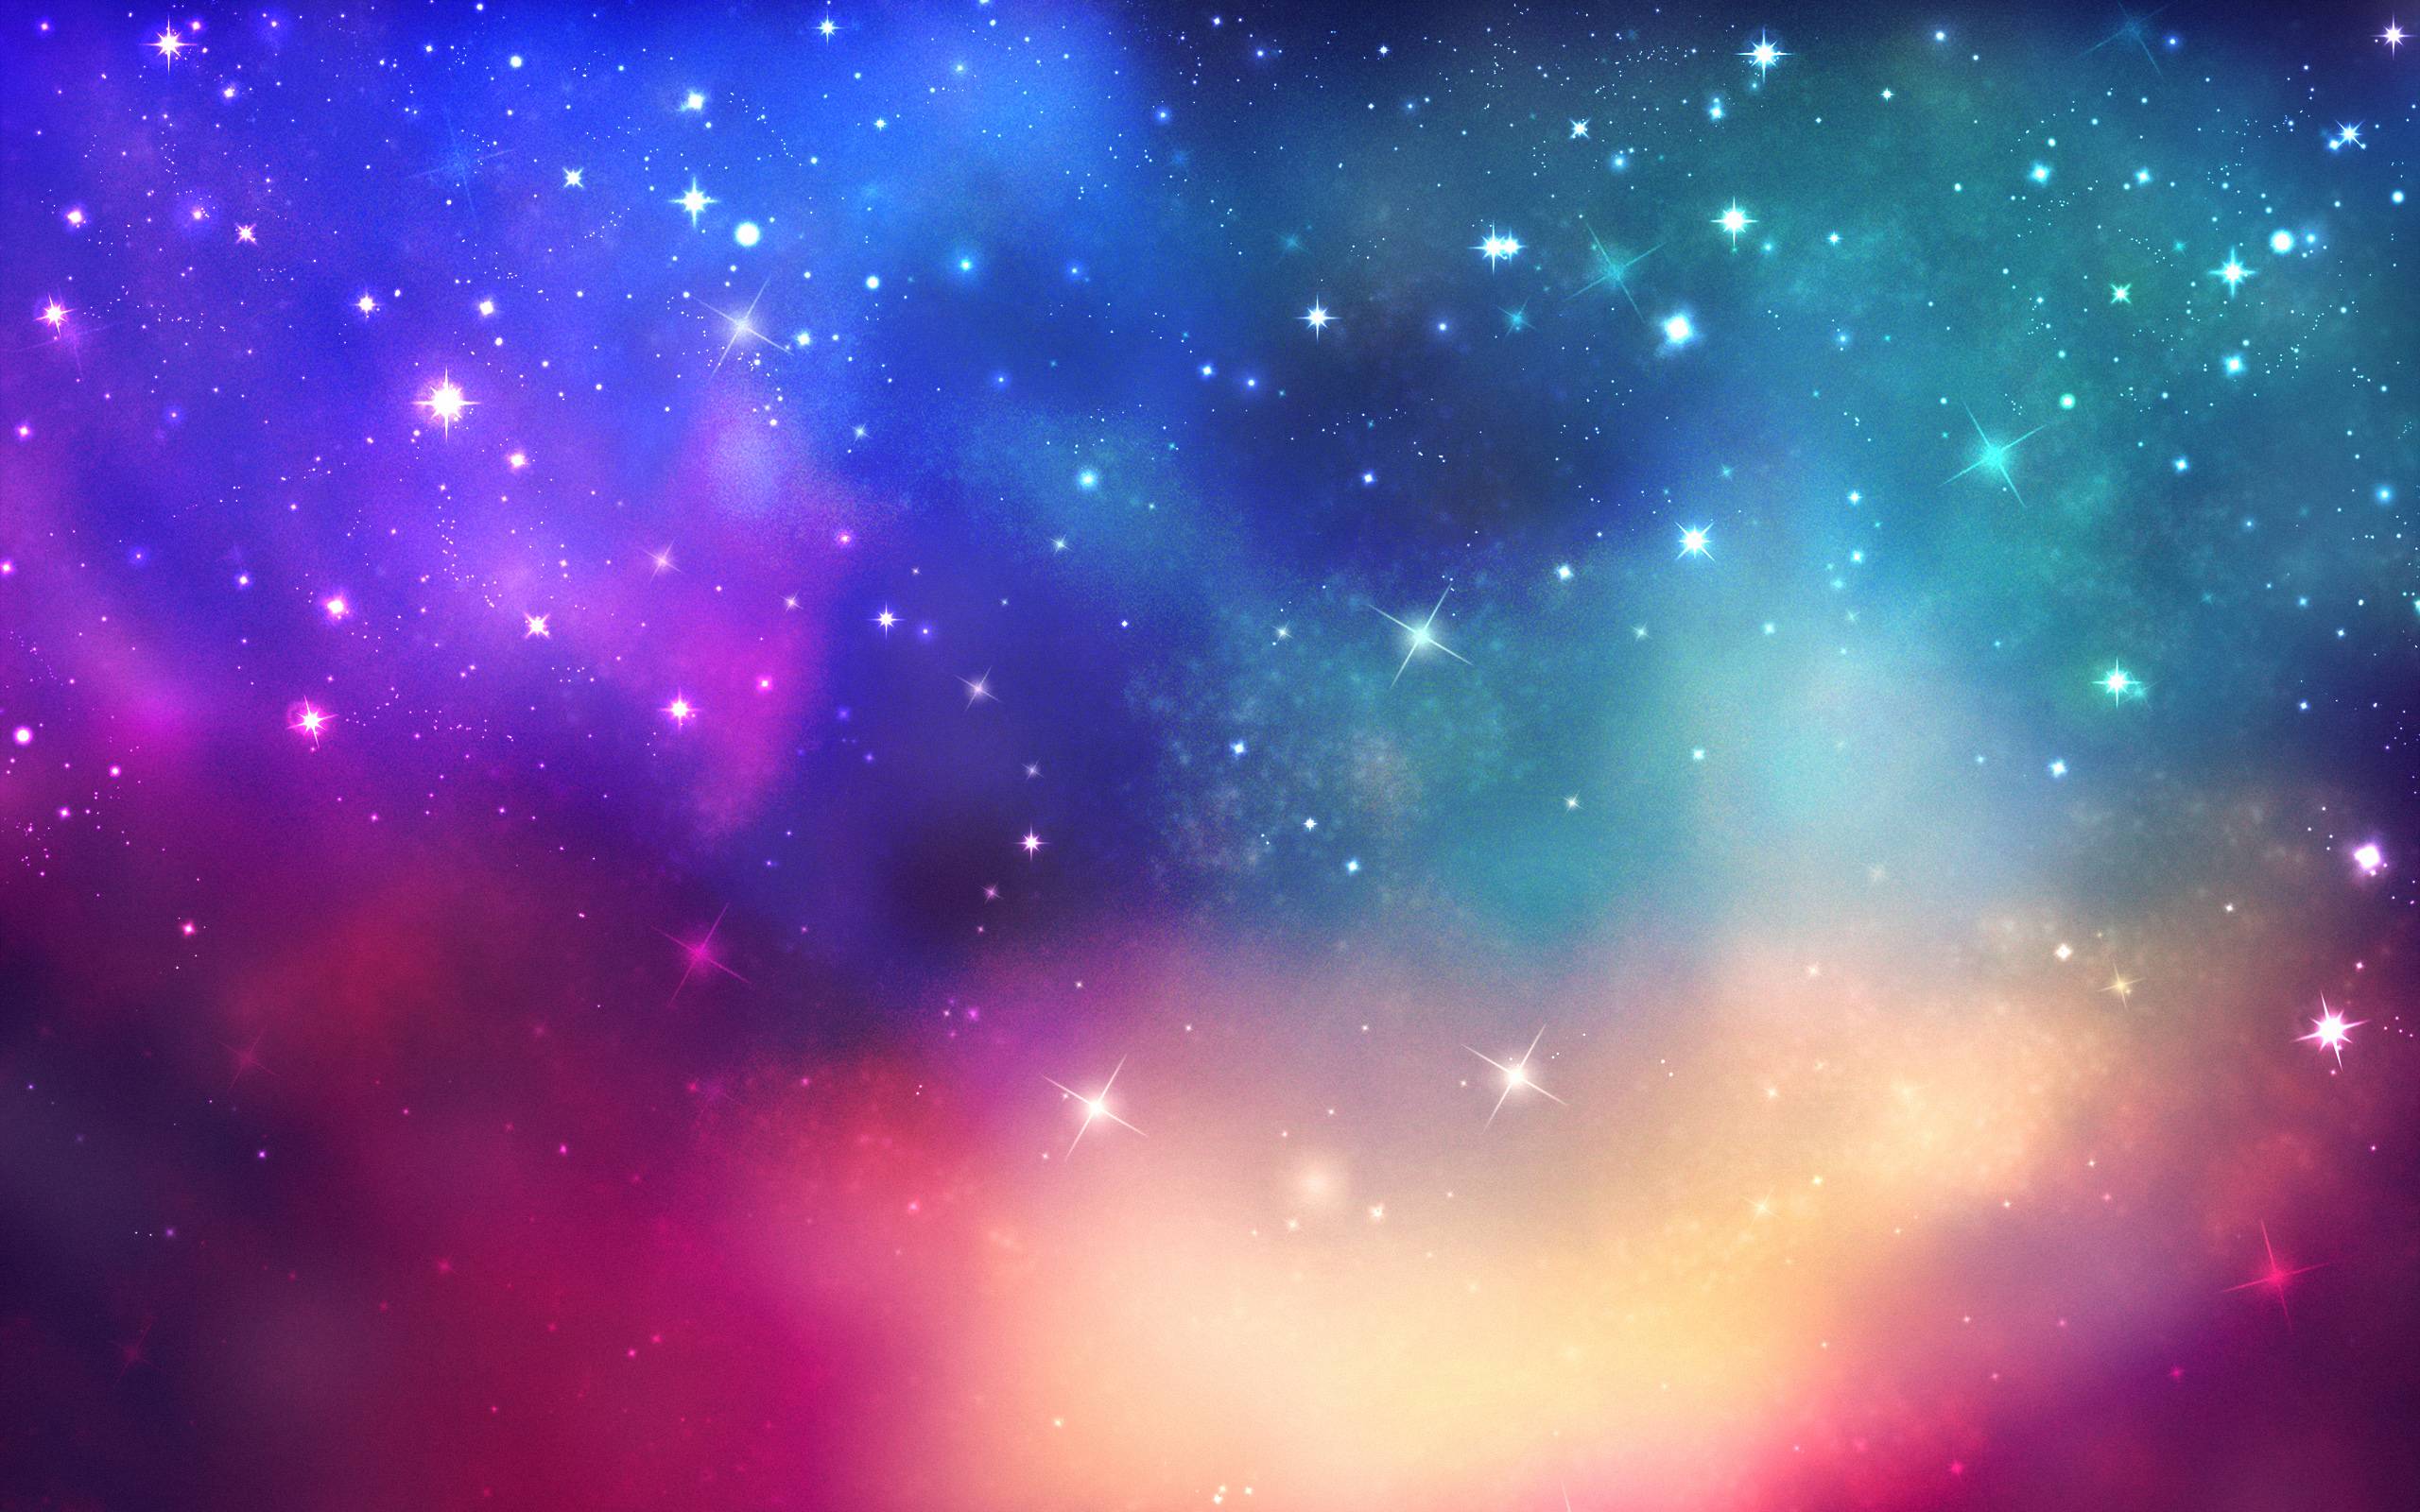 Outer Space Stars Wallpaper HD Picture 5 HD Wallpaper. lzamgs